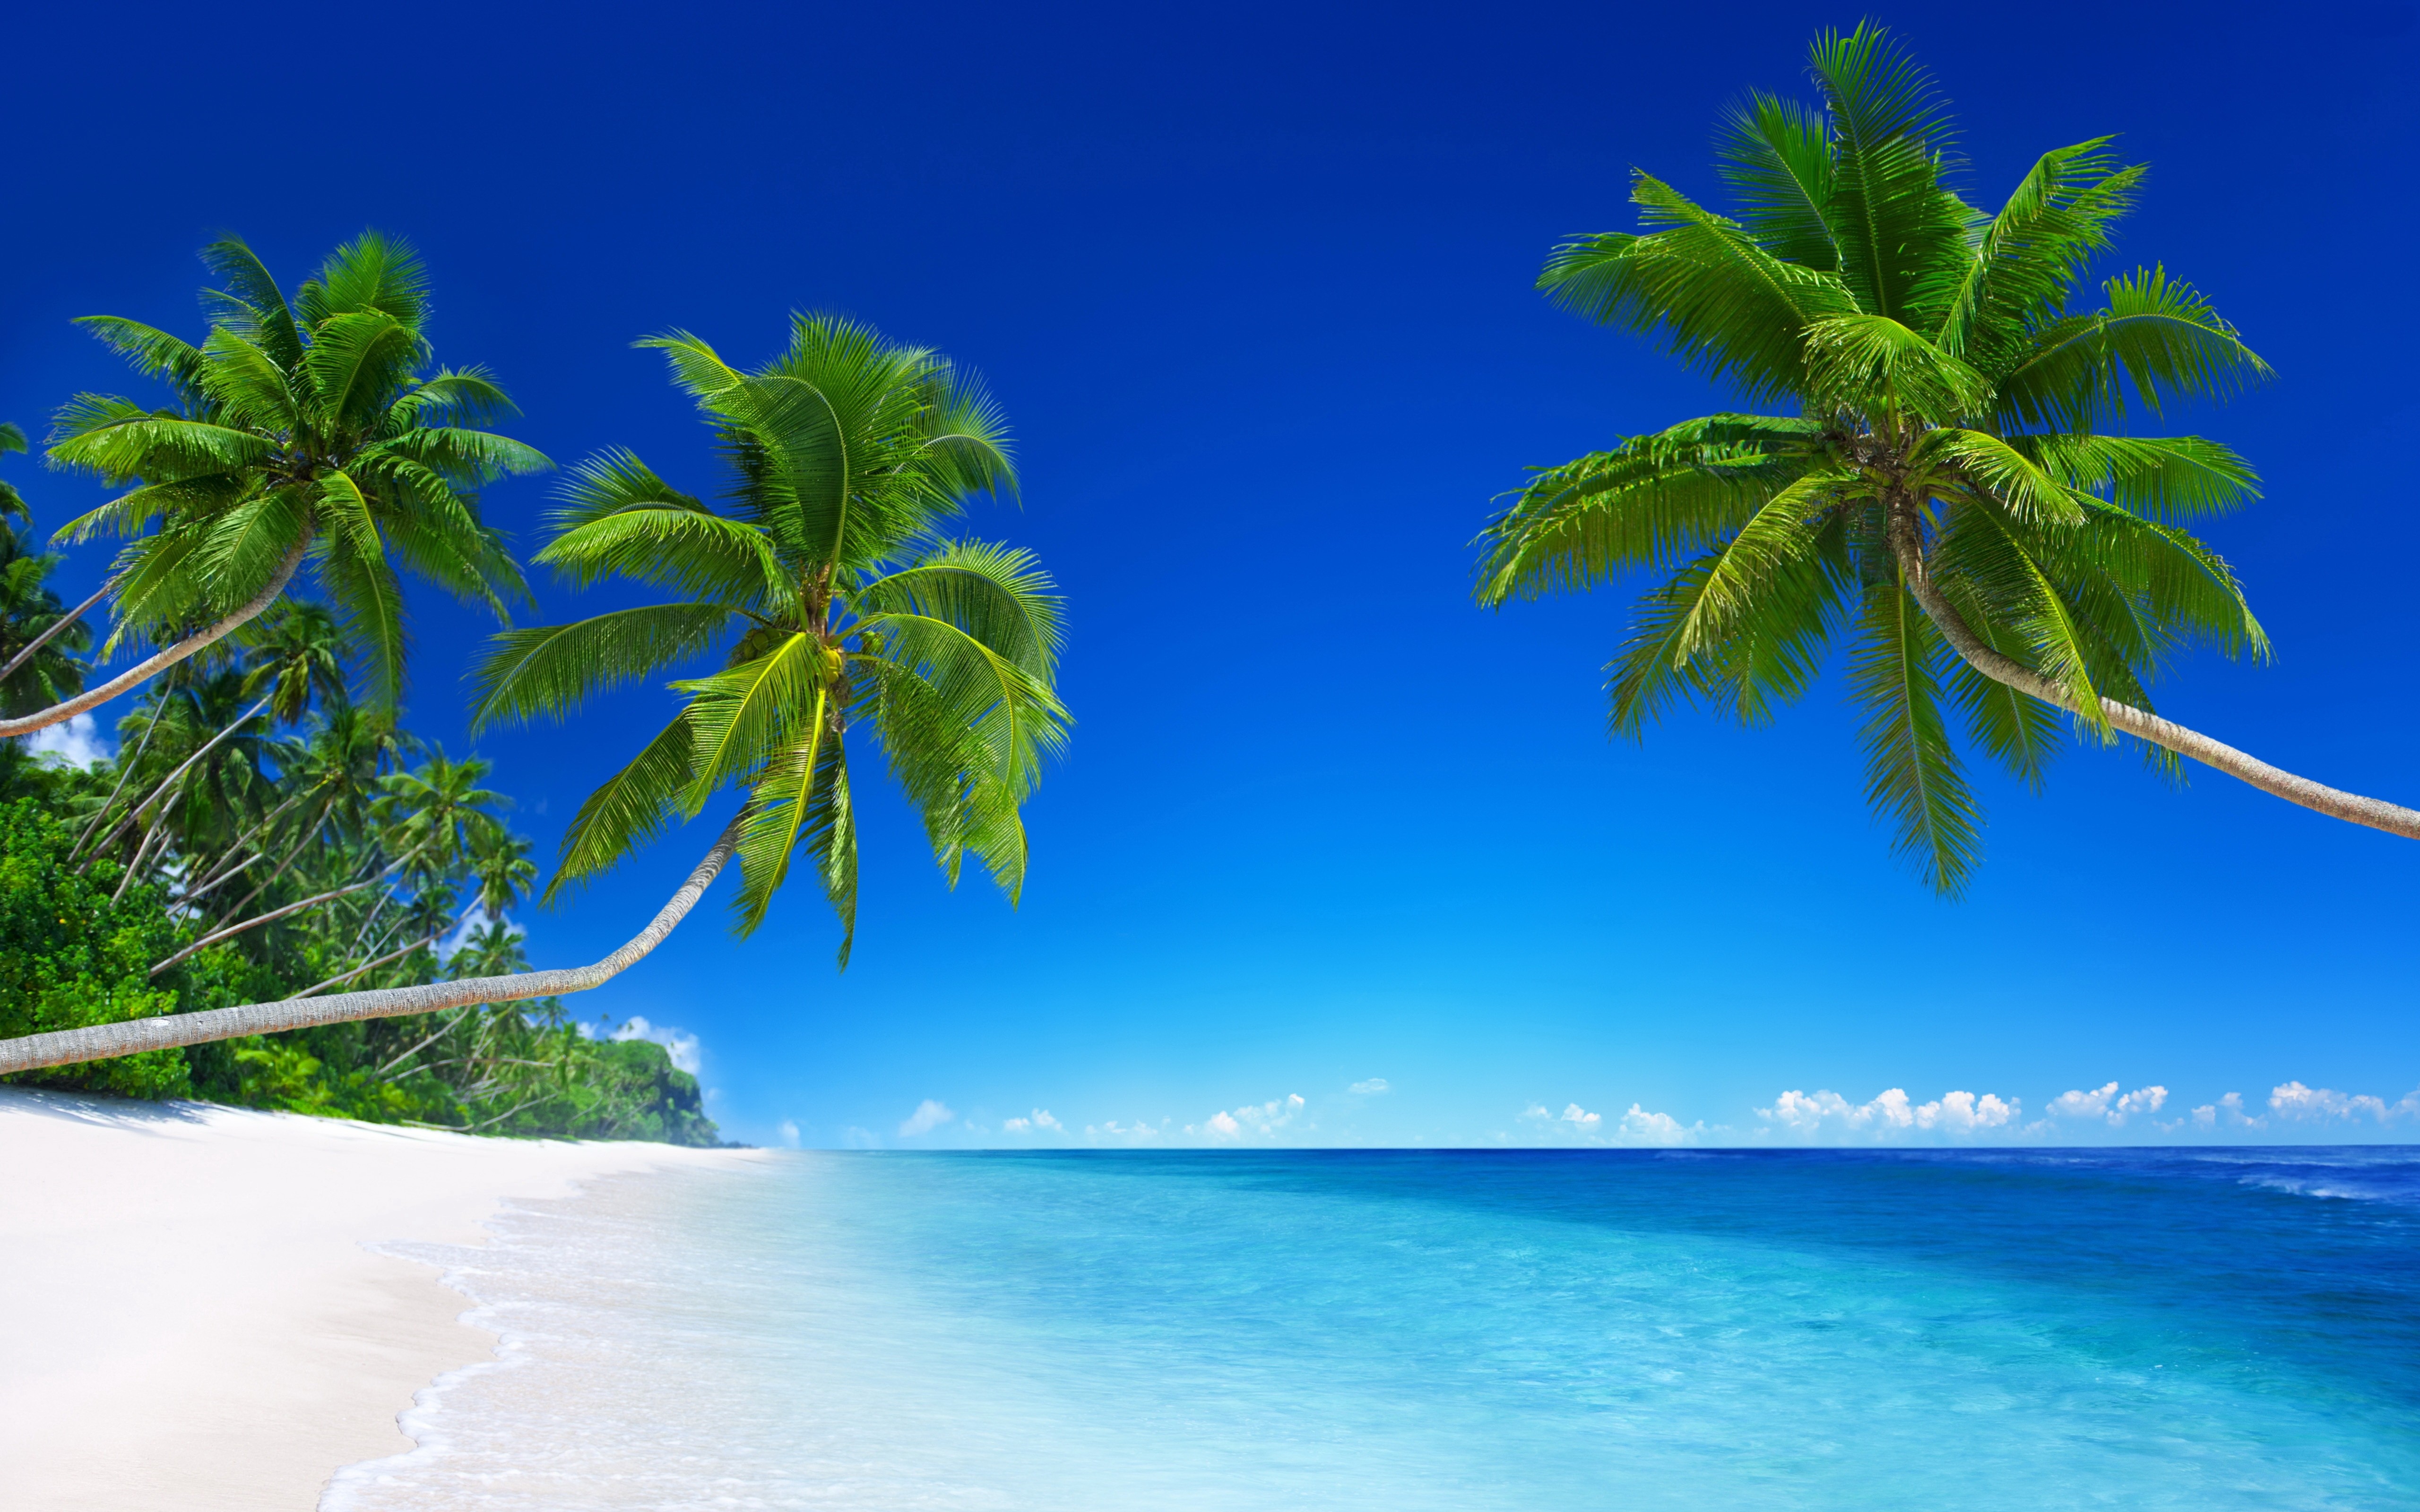 landscape, Tropical, Beach, Palm trees Wallpapers HD / Desktop and Mobile Backgrounds